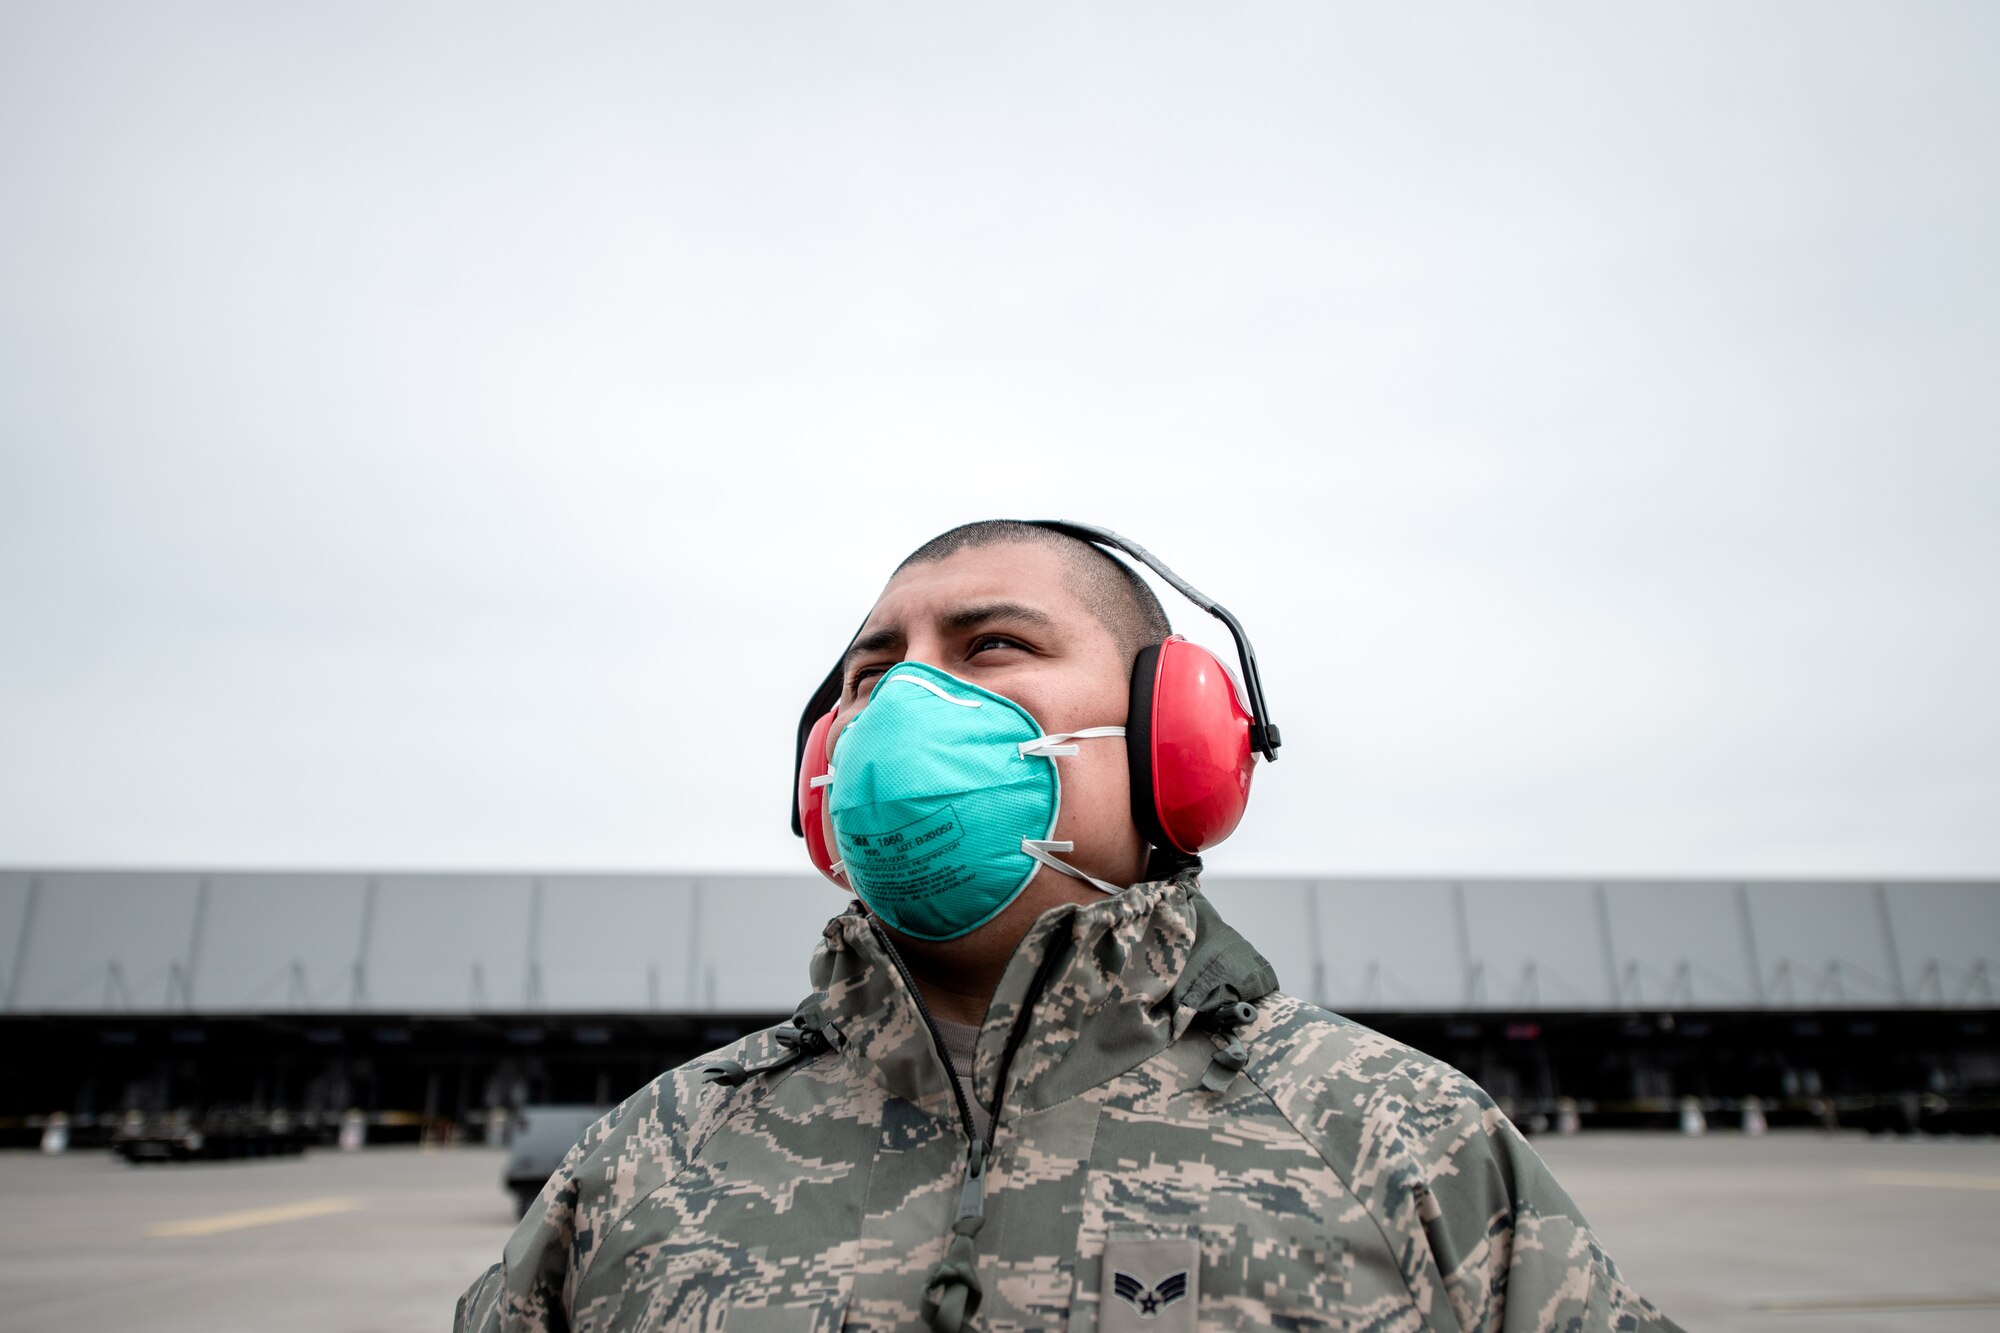 Photo of Airman wearing face covering